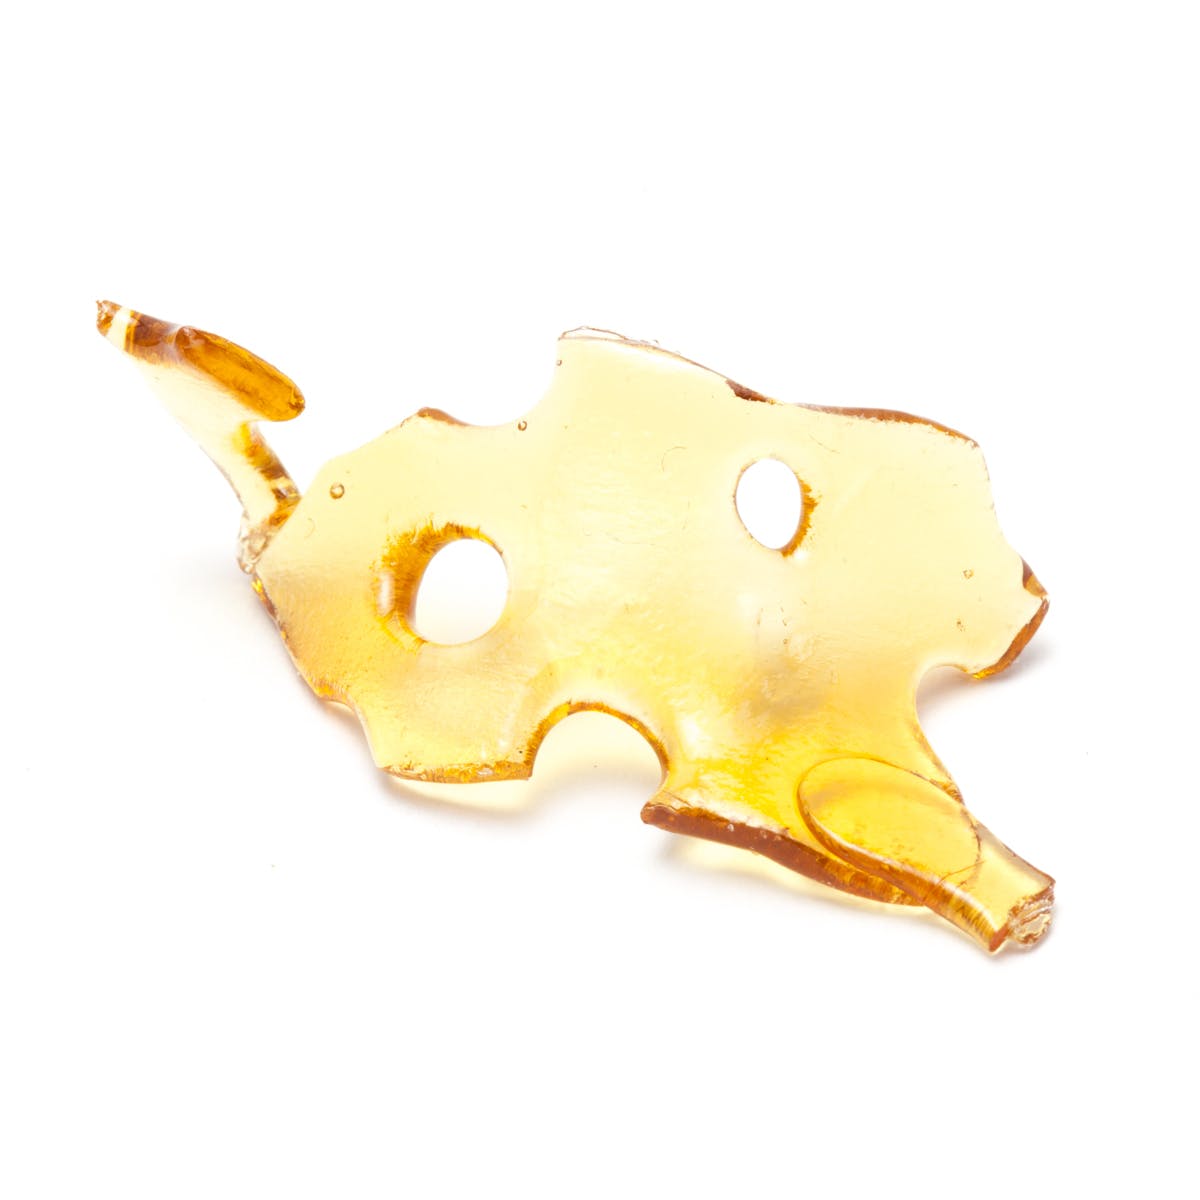 concentrate-white-widow-237-shatter